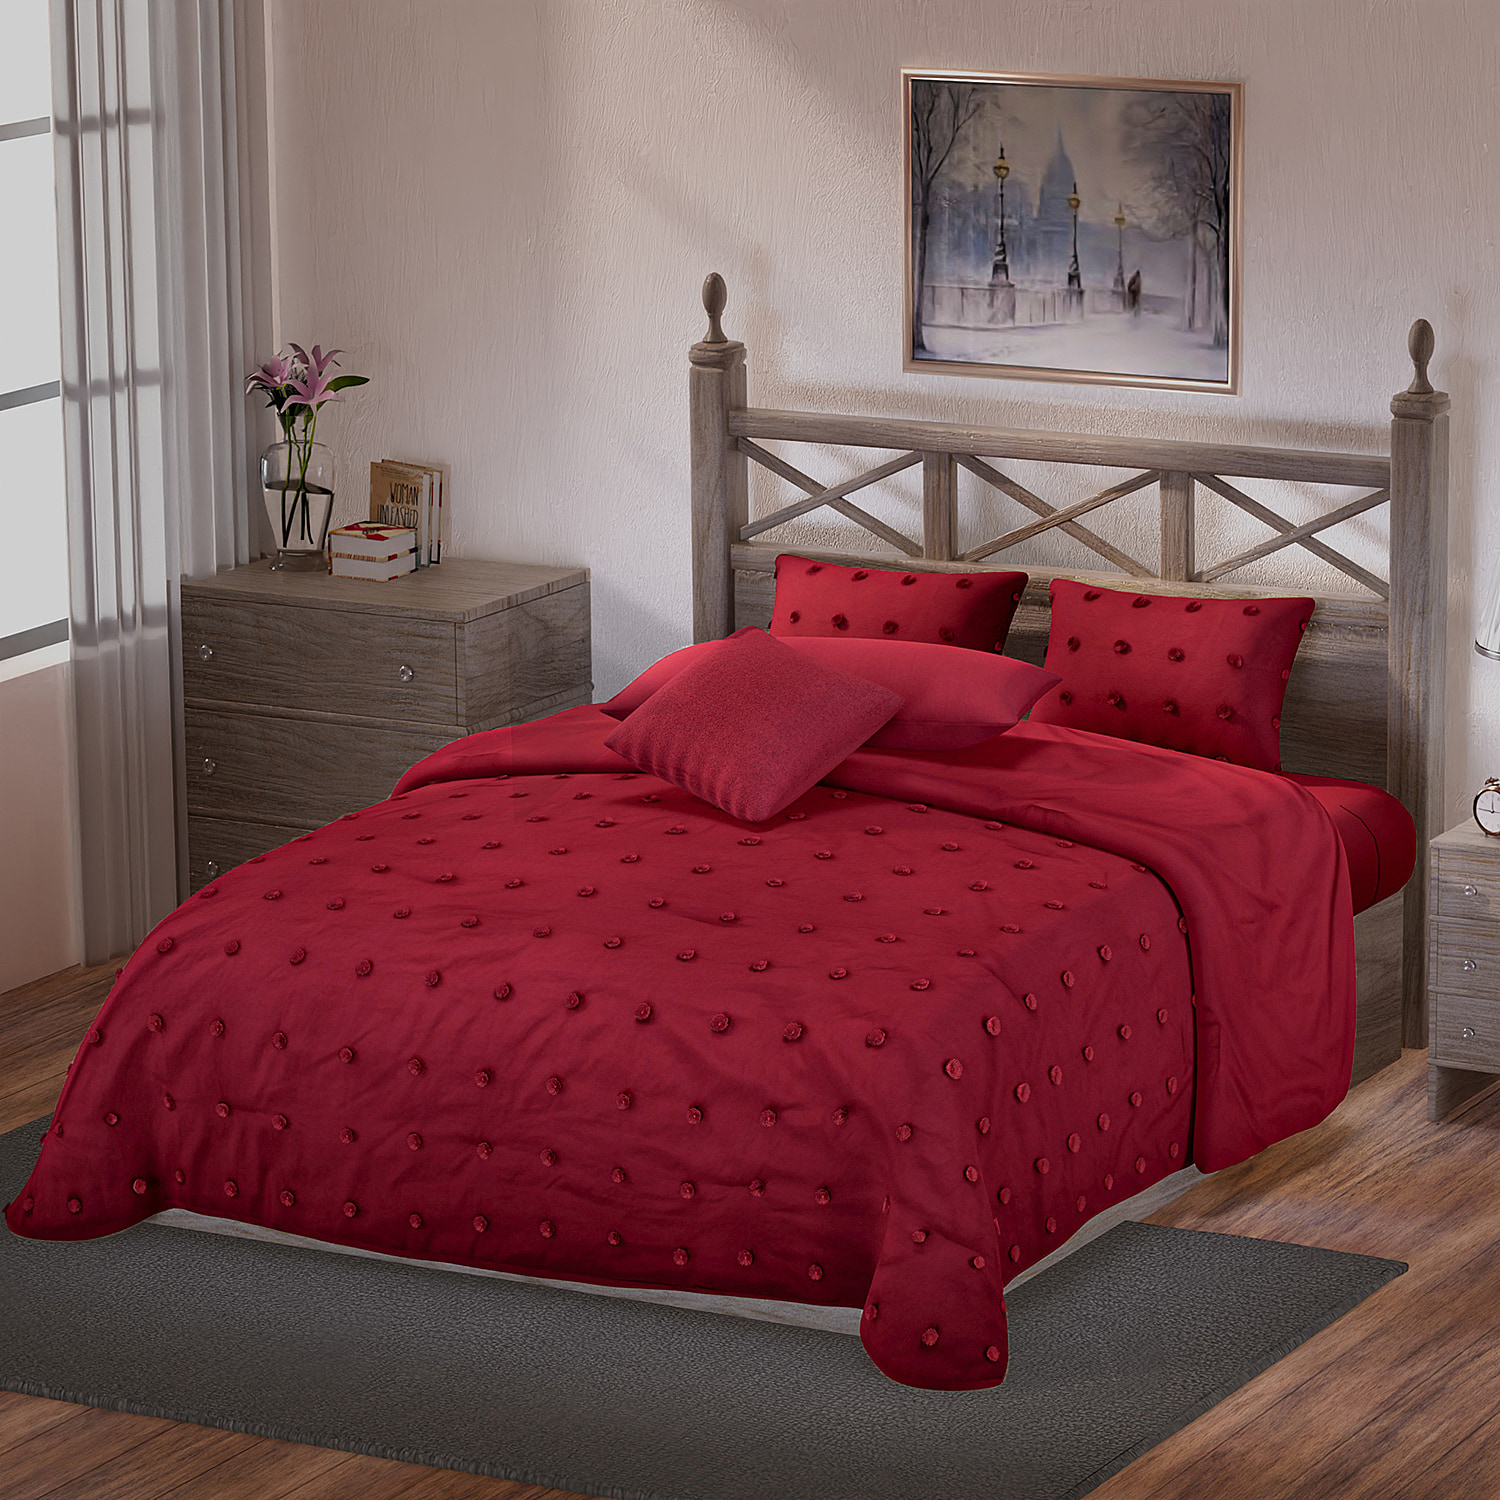 Luxury-Deluxe-Piece-set--Comforter,-Fitted-Sheet,-Pillow-Cases,-Cushio